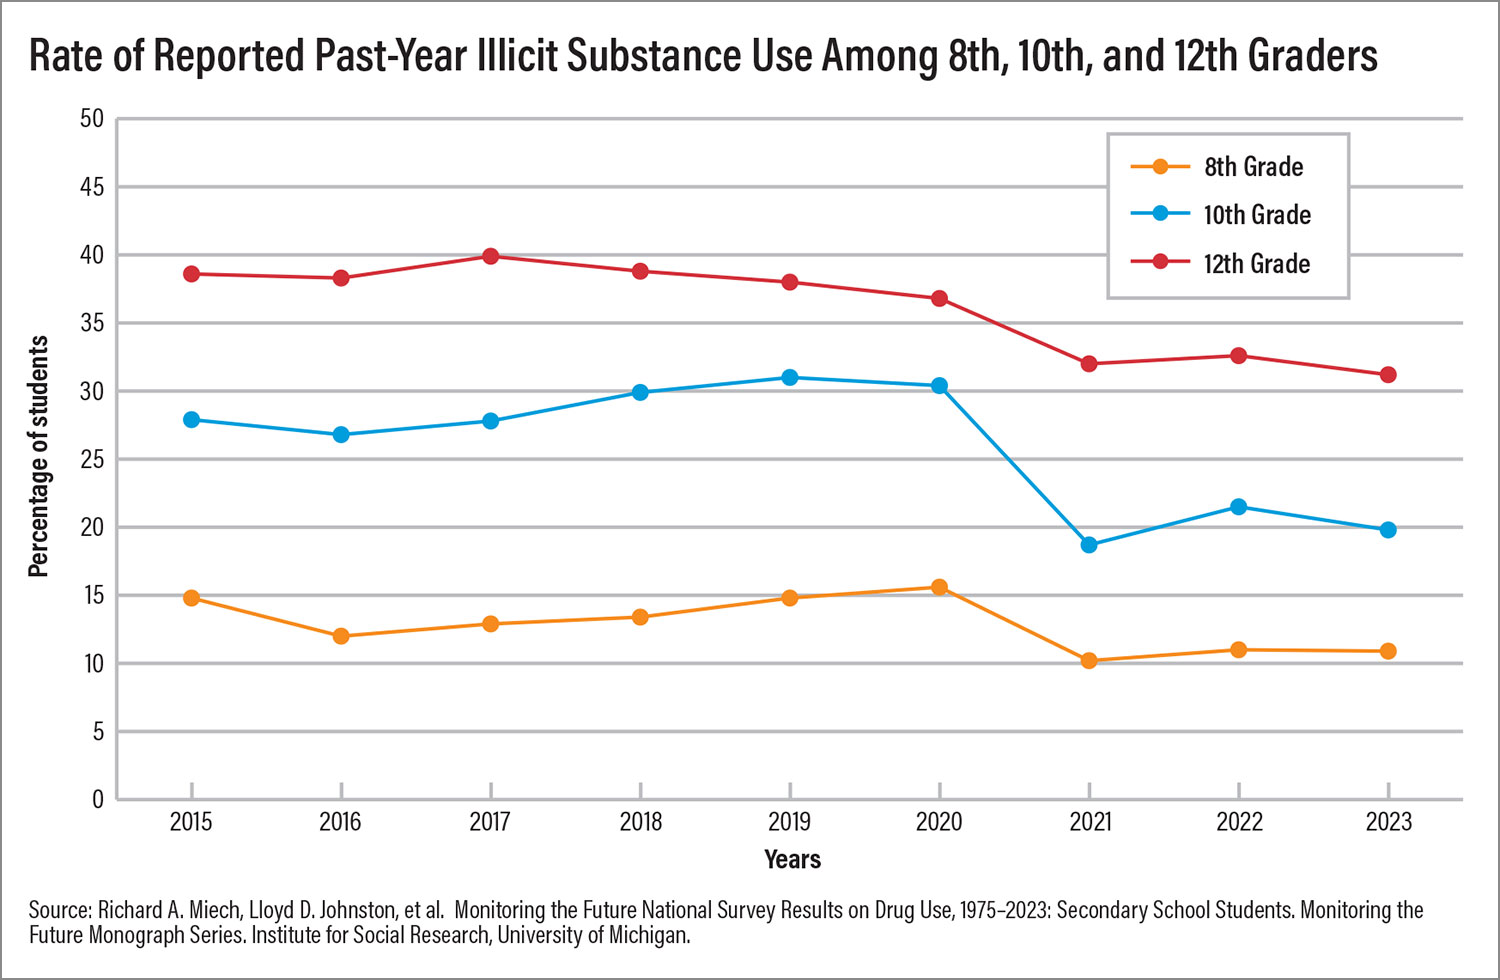 Figure of Rate of Reported Past-Year Illicit Substance Use Among 8th, 10th, and 12th Graders.